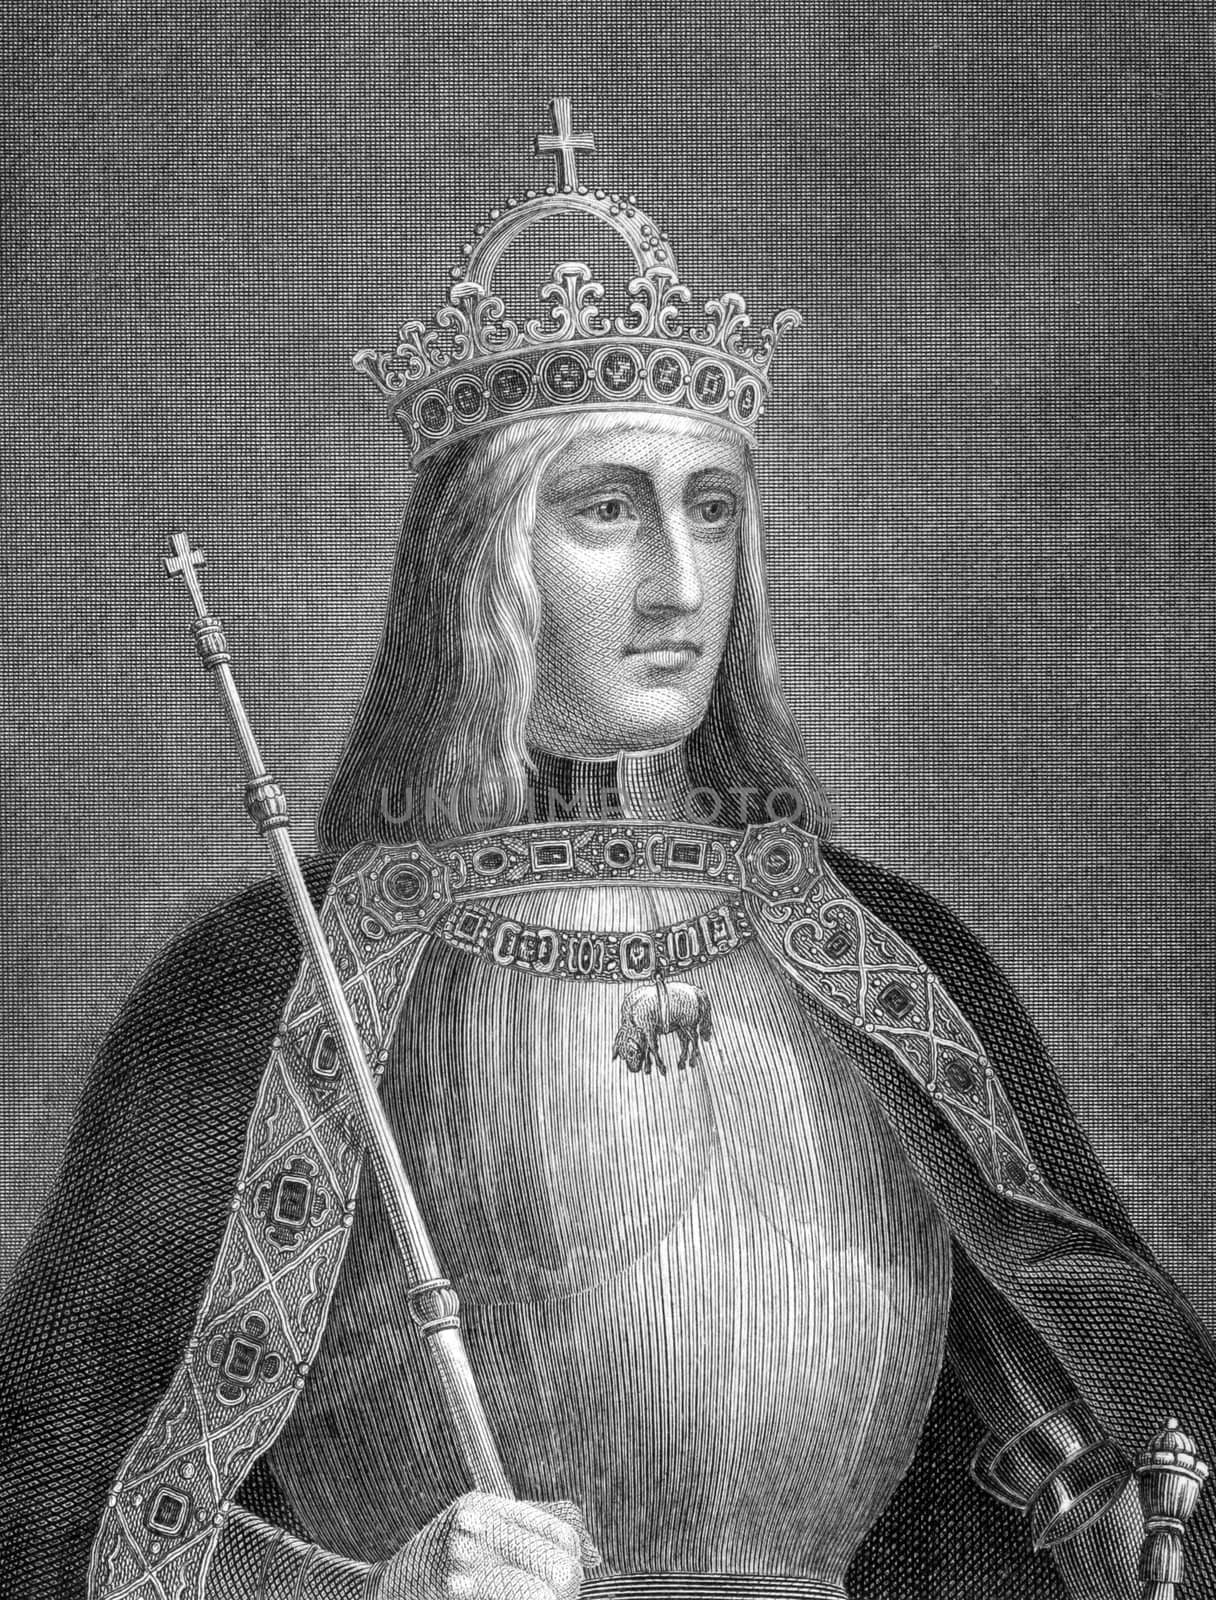 Maximilian I, Holy Roman Emperor (1459-1519) on engraving from 1859. Holy Roman Emperor during 1493-1519. Engraved by C.Deucker and published in Meyers Konversations-Lexikon, Germany,1859.